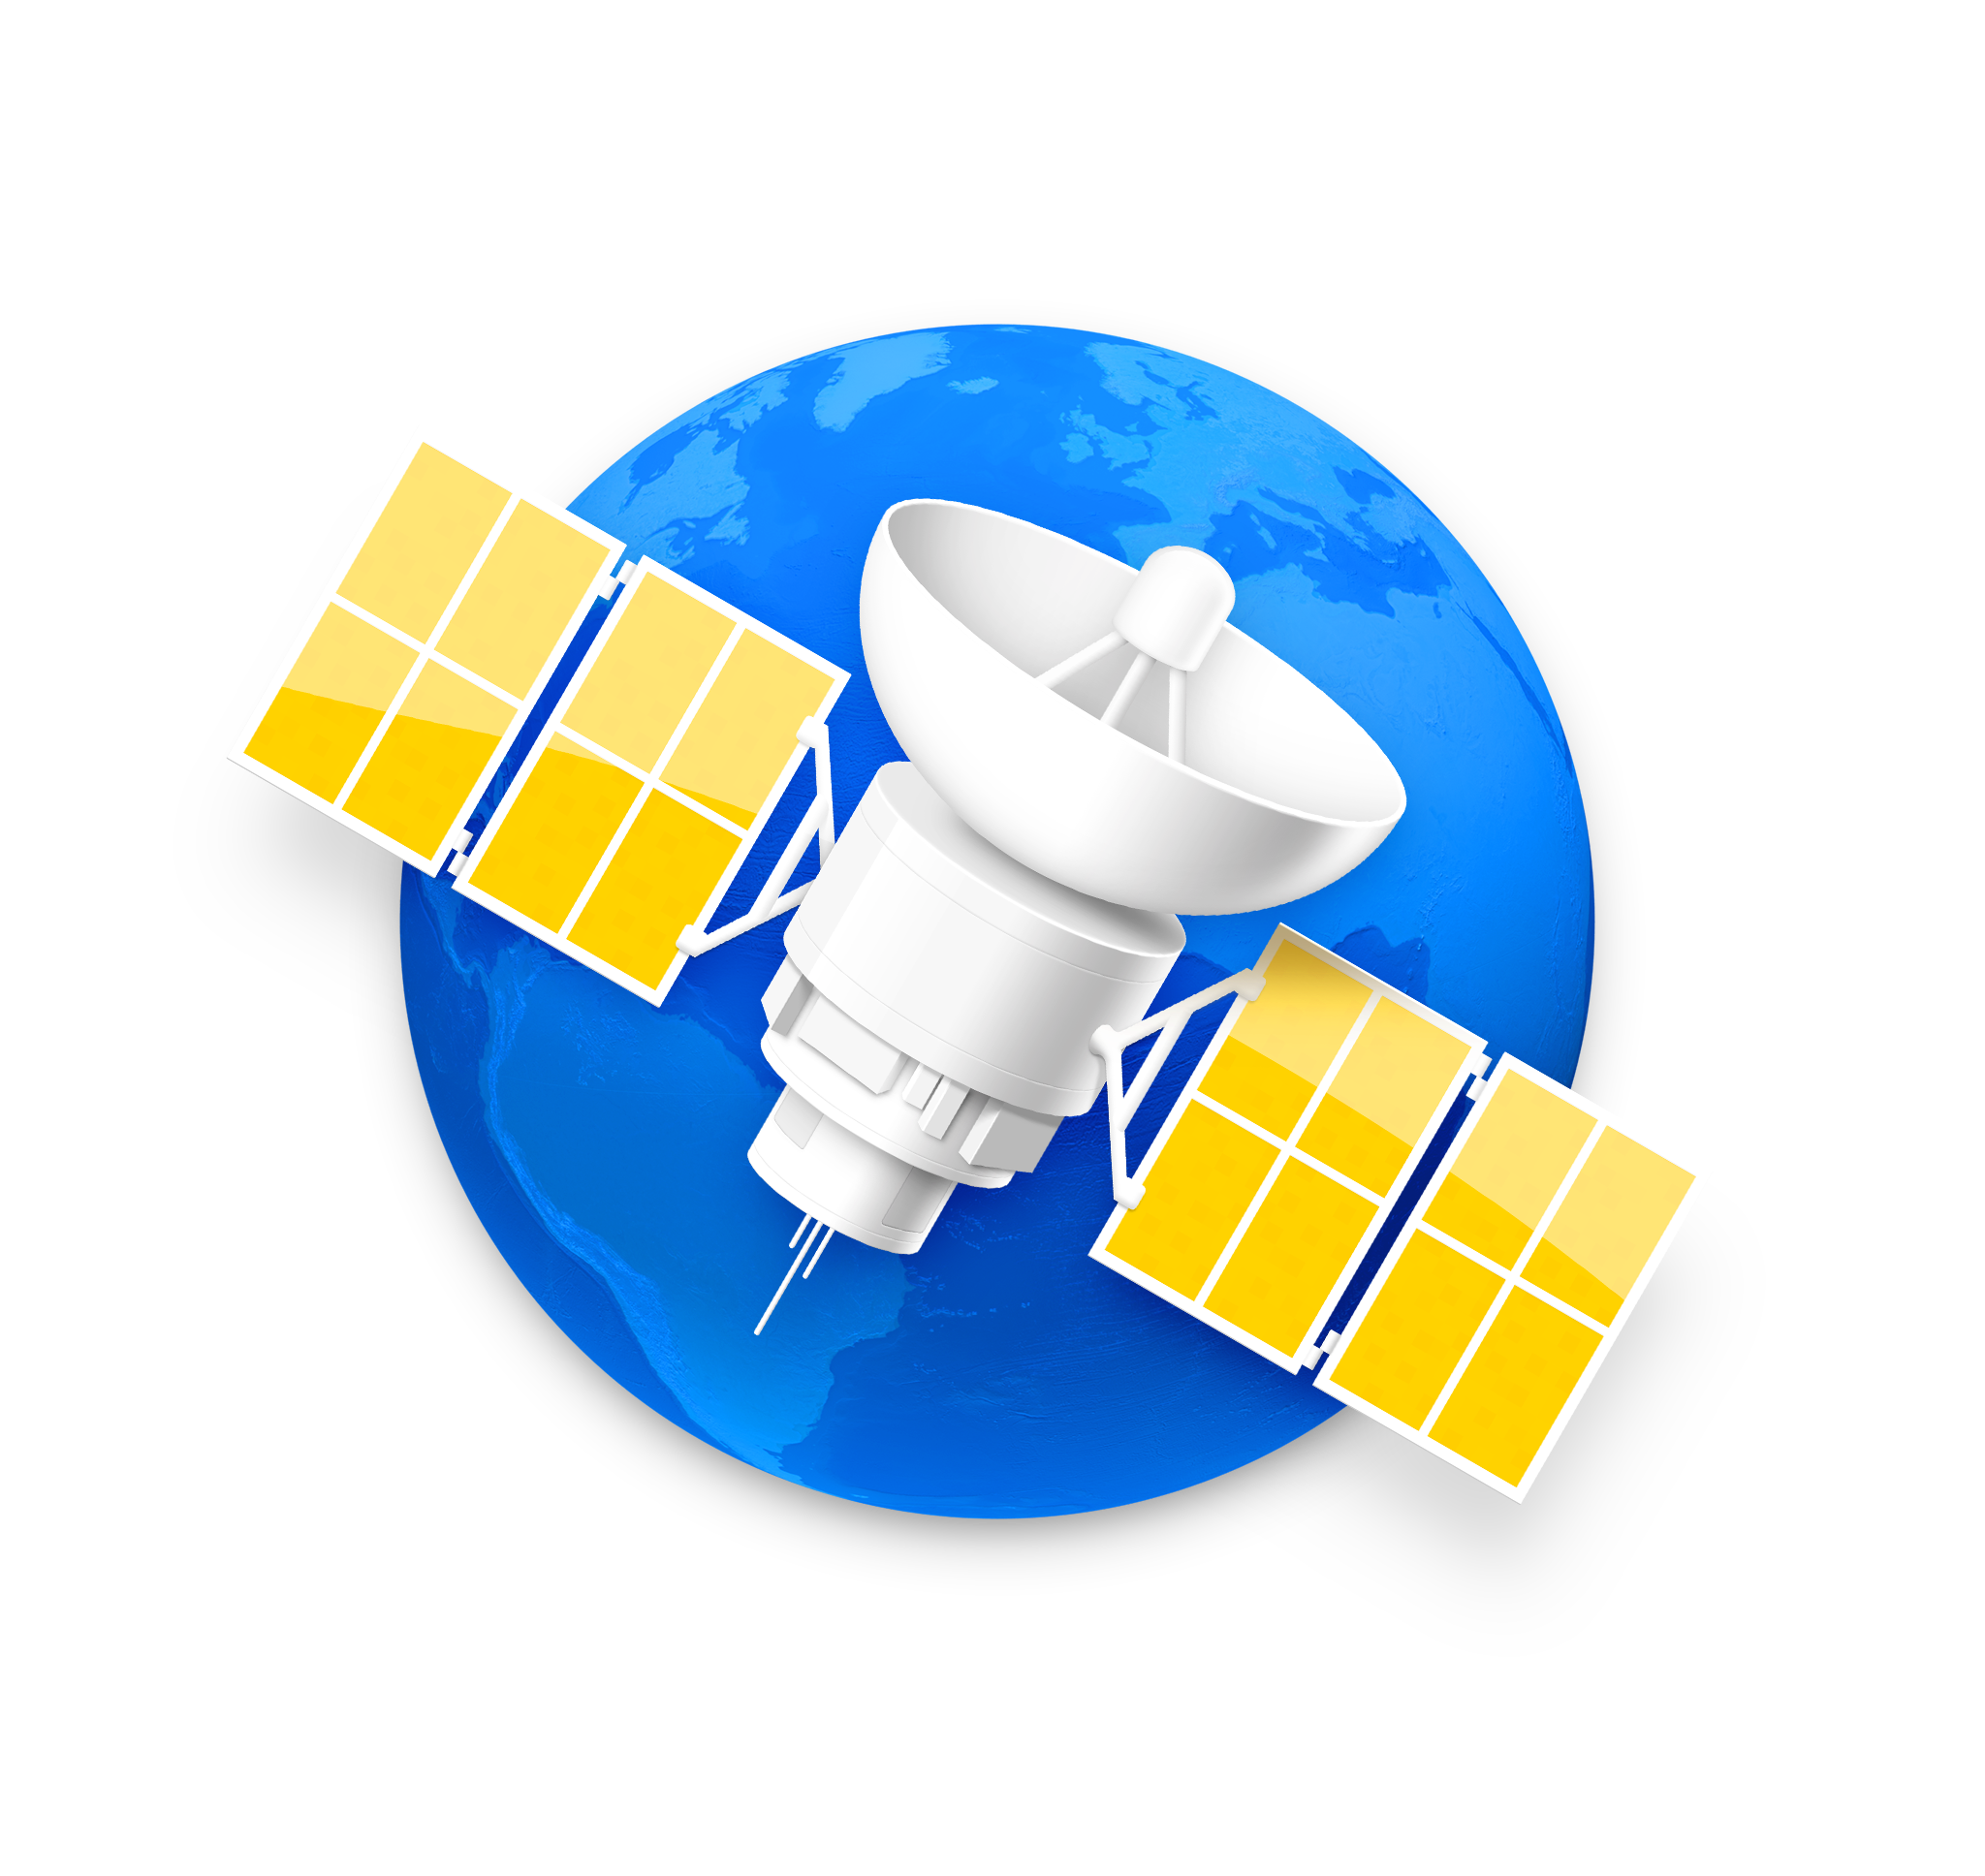 New NetNewsWire icon, which shows a communications satellite orbiting the Earth.